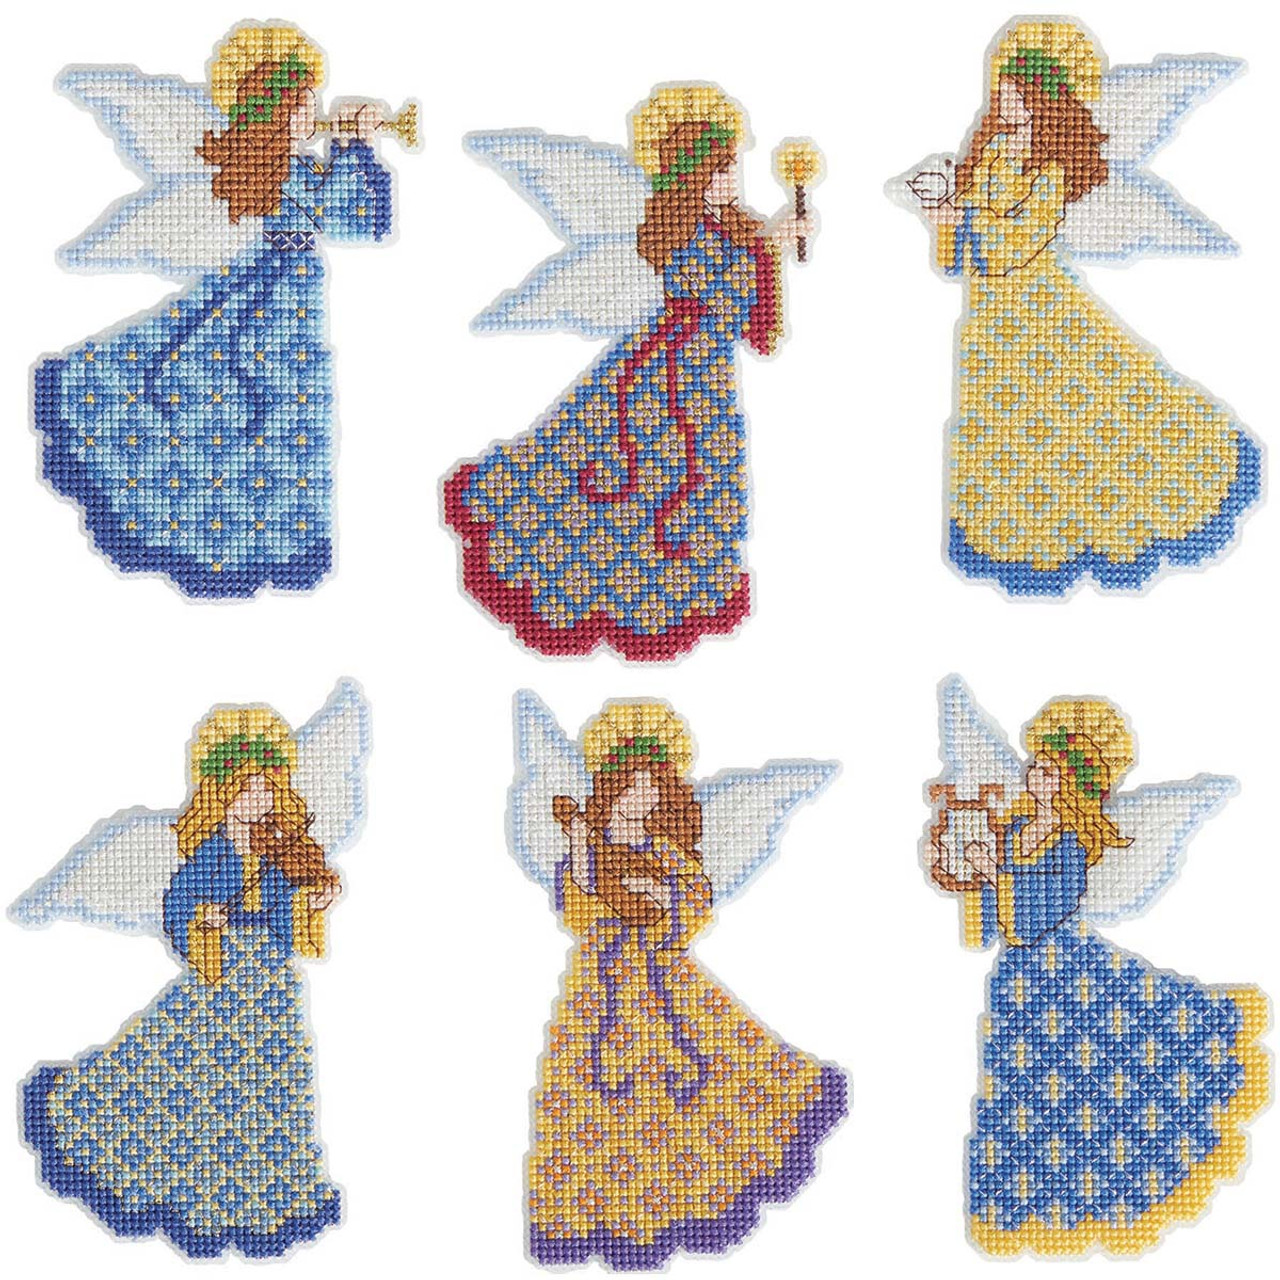 Cute baby angel cross stitch counted pattern Beginners 